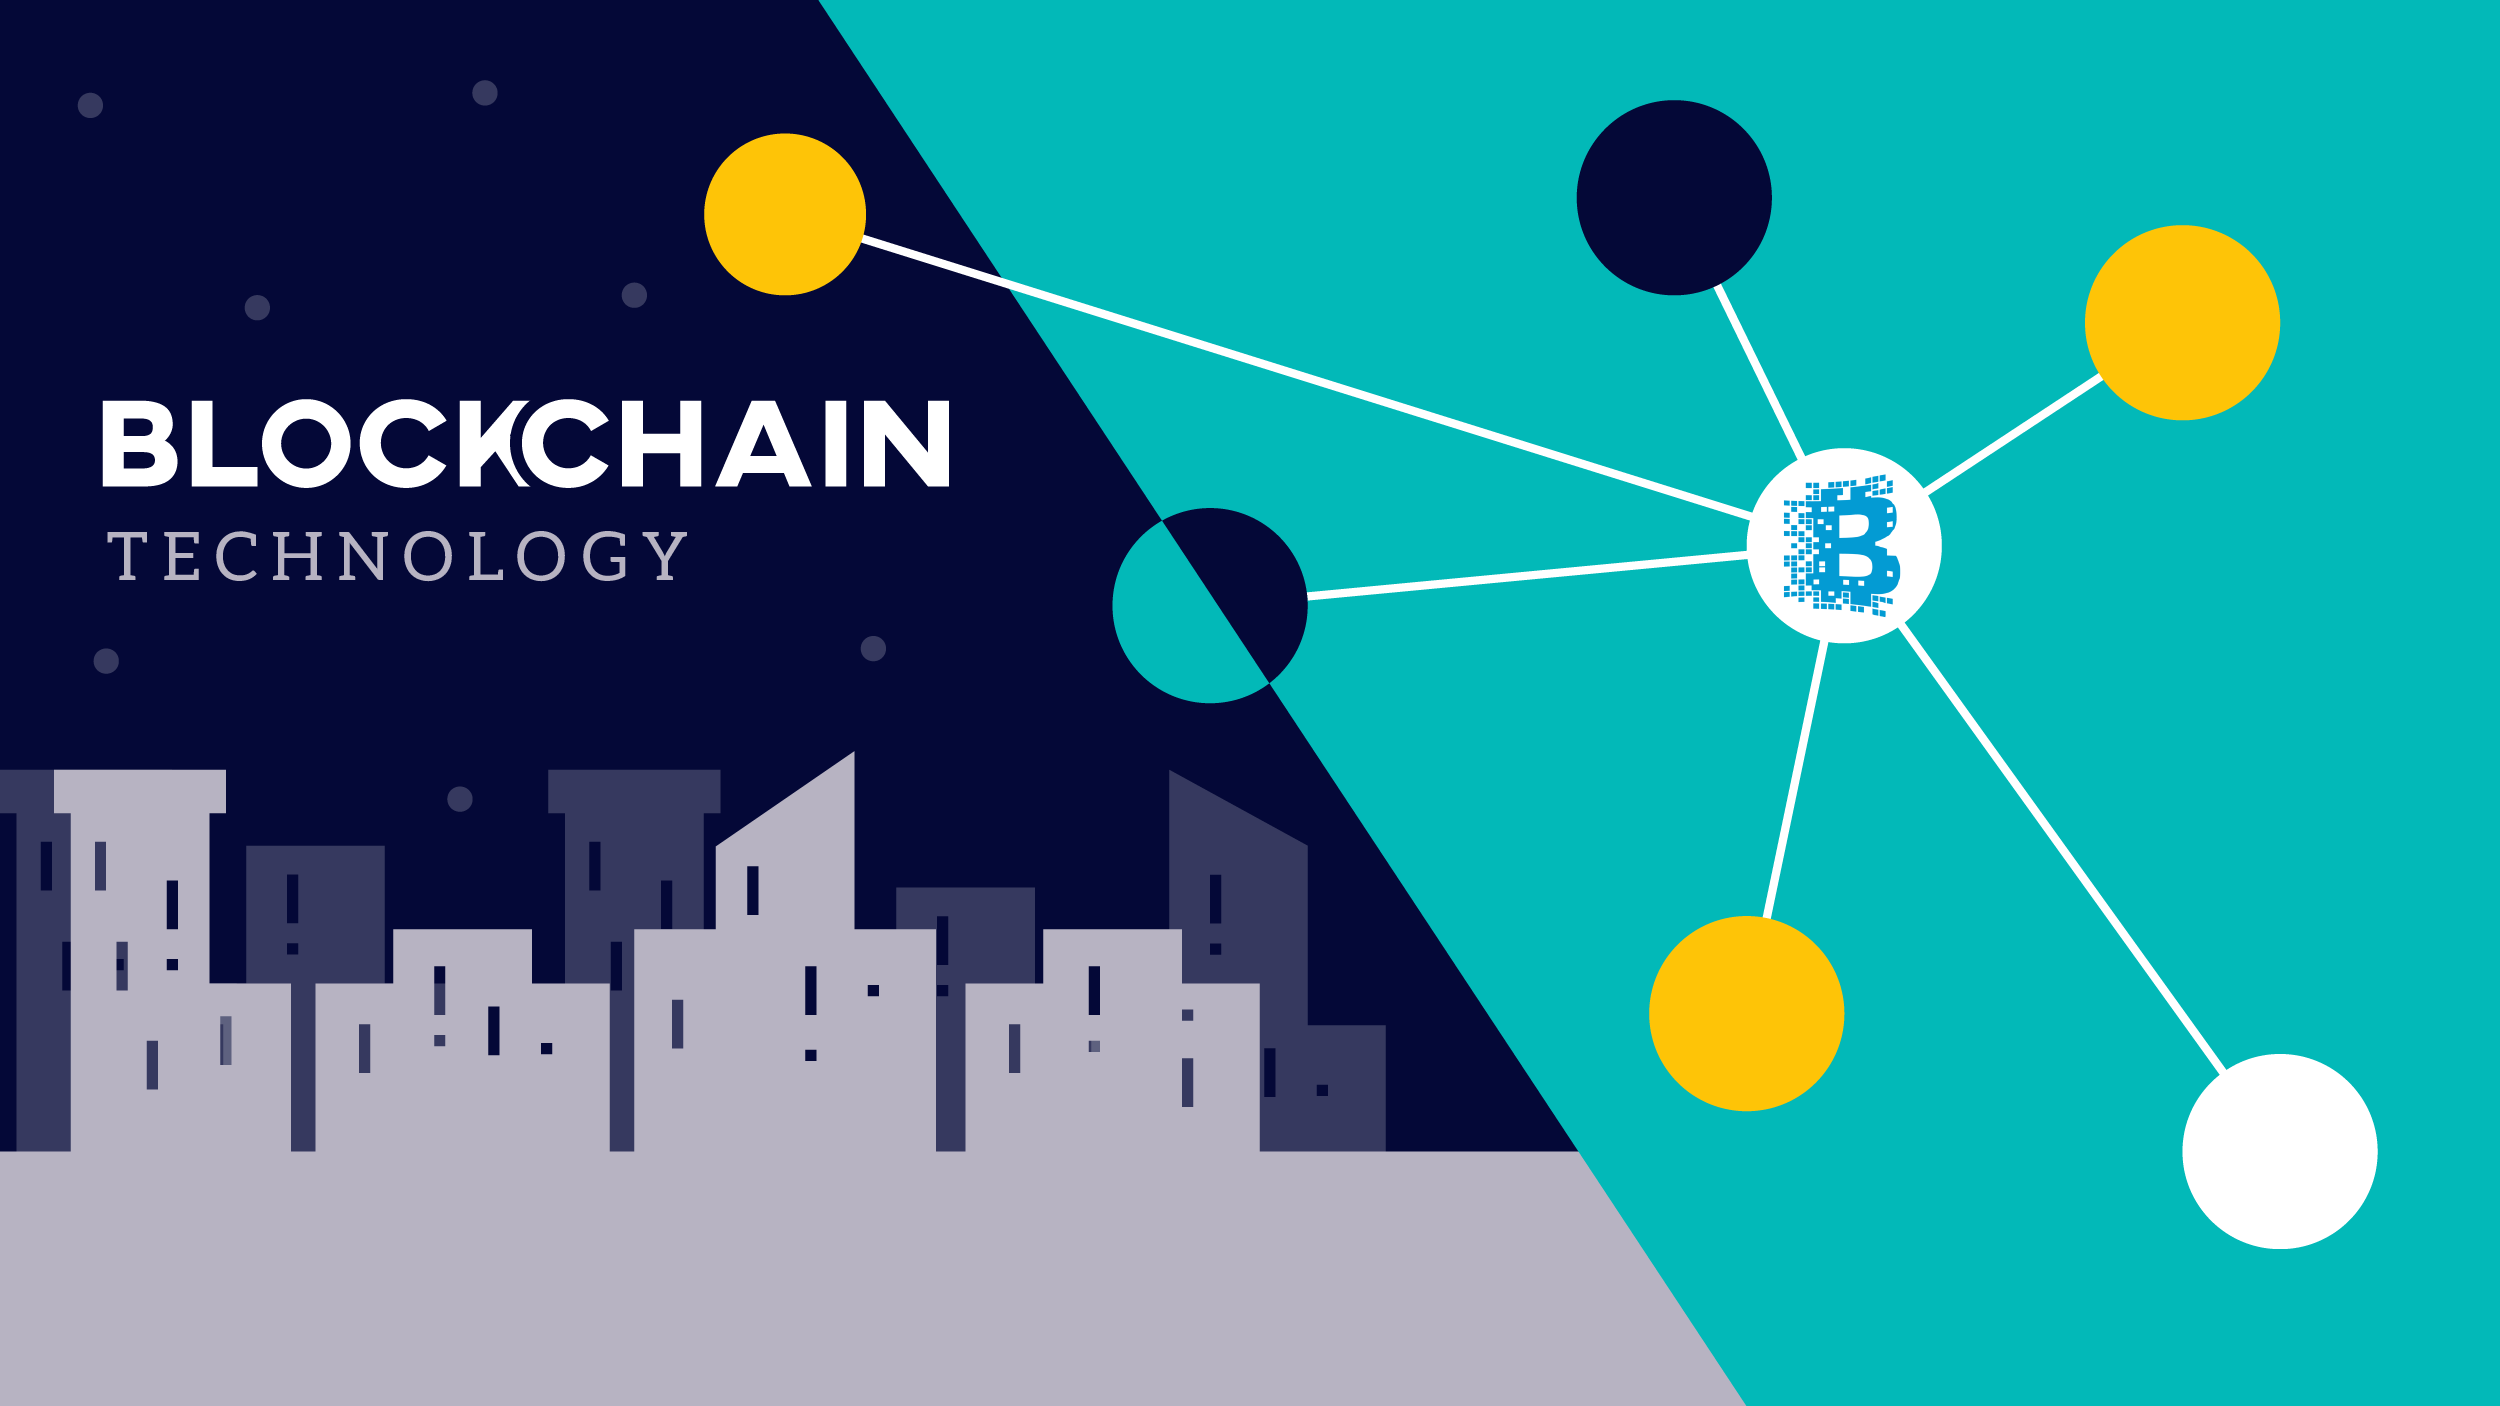 What Is Blockchain? And How Does It Work?